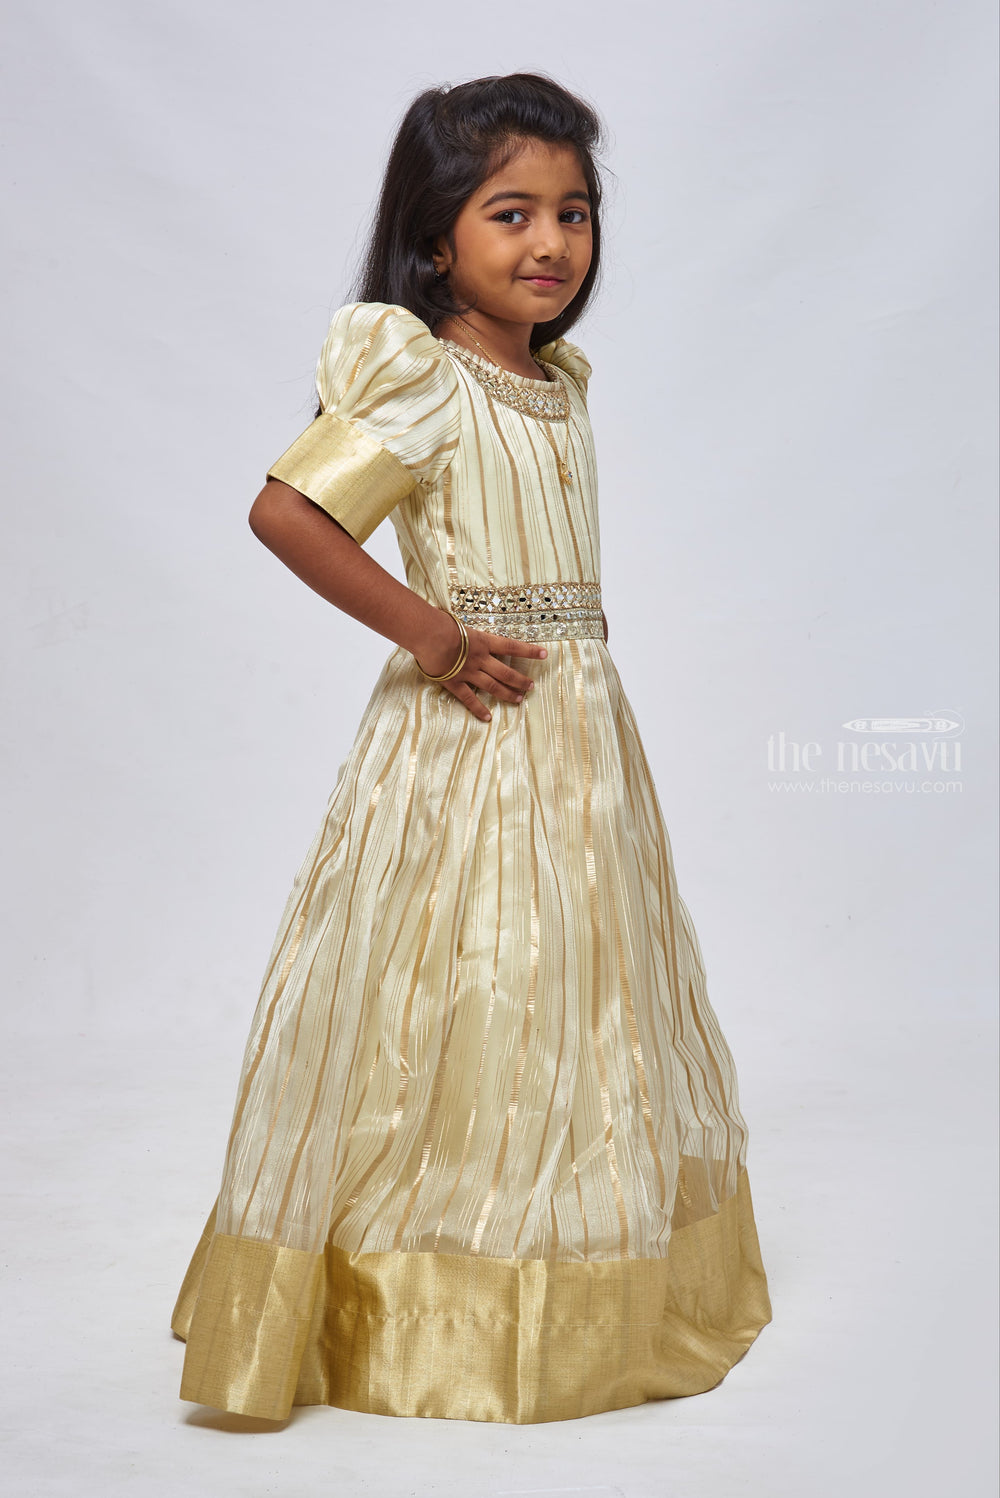 The Nesavu Girls Party Gown Yellow Elegance: Striped Organza Anarkali with Gota Mirror Embroidery for Girls Nesavu Golden Stripe Princess Gown with Puff Sleeves | Perfect for Special Occasions | The Nesavu